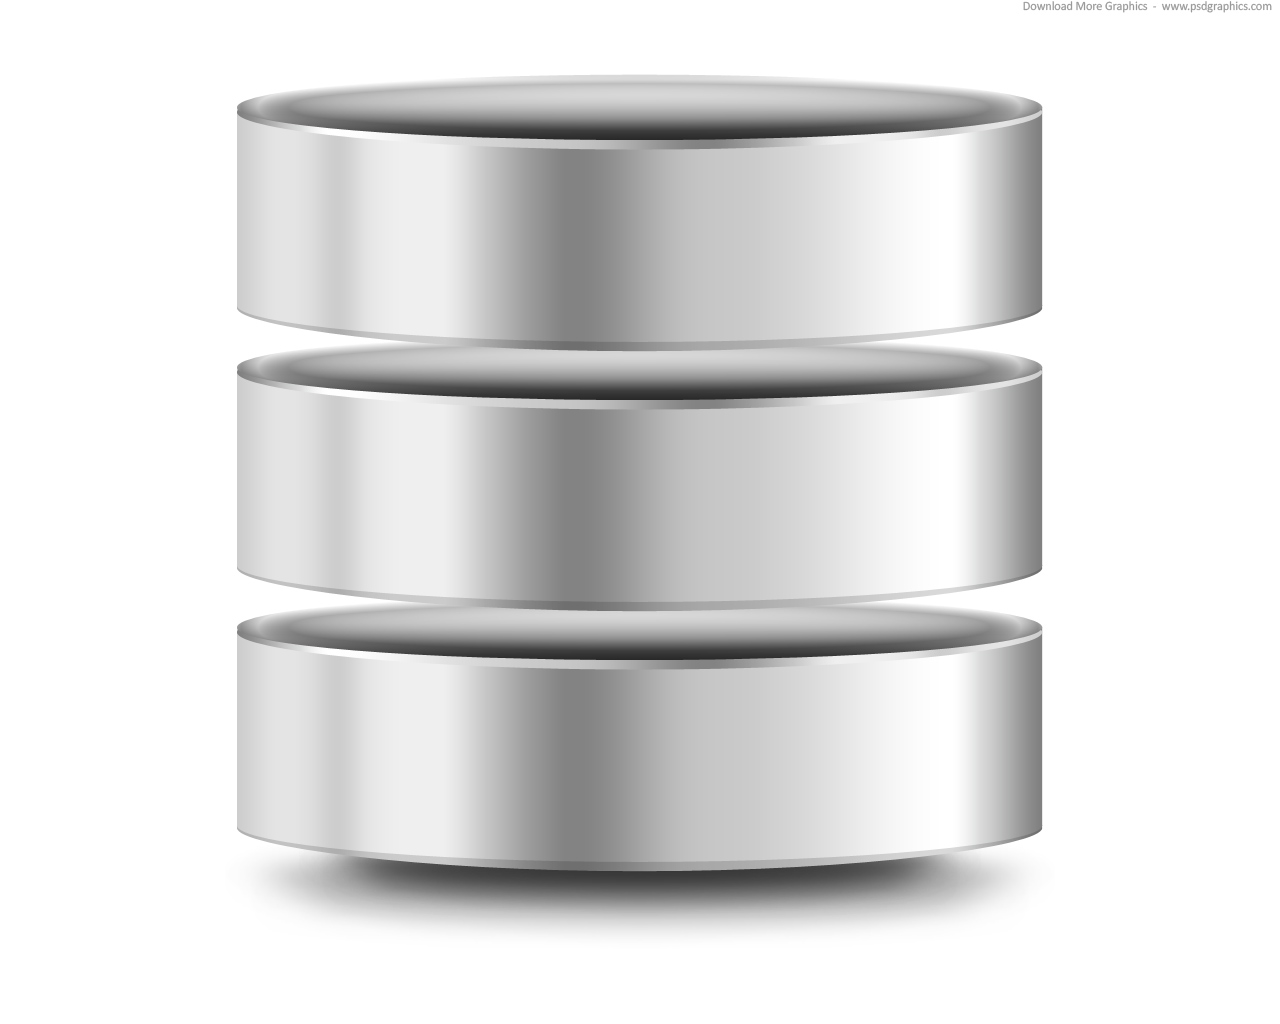 5 Silver Folder Icon Images